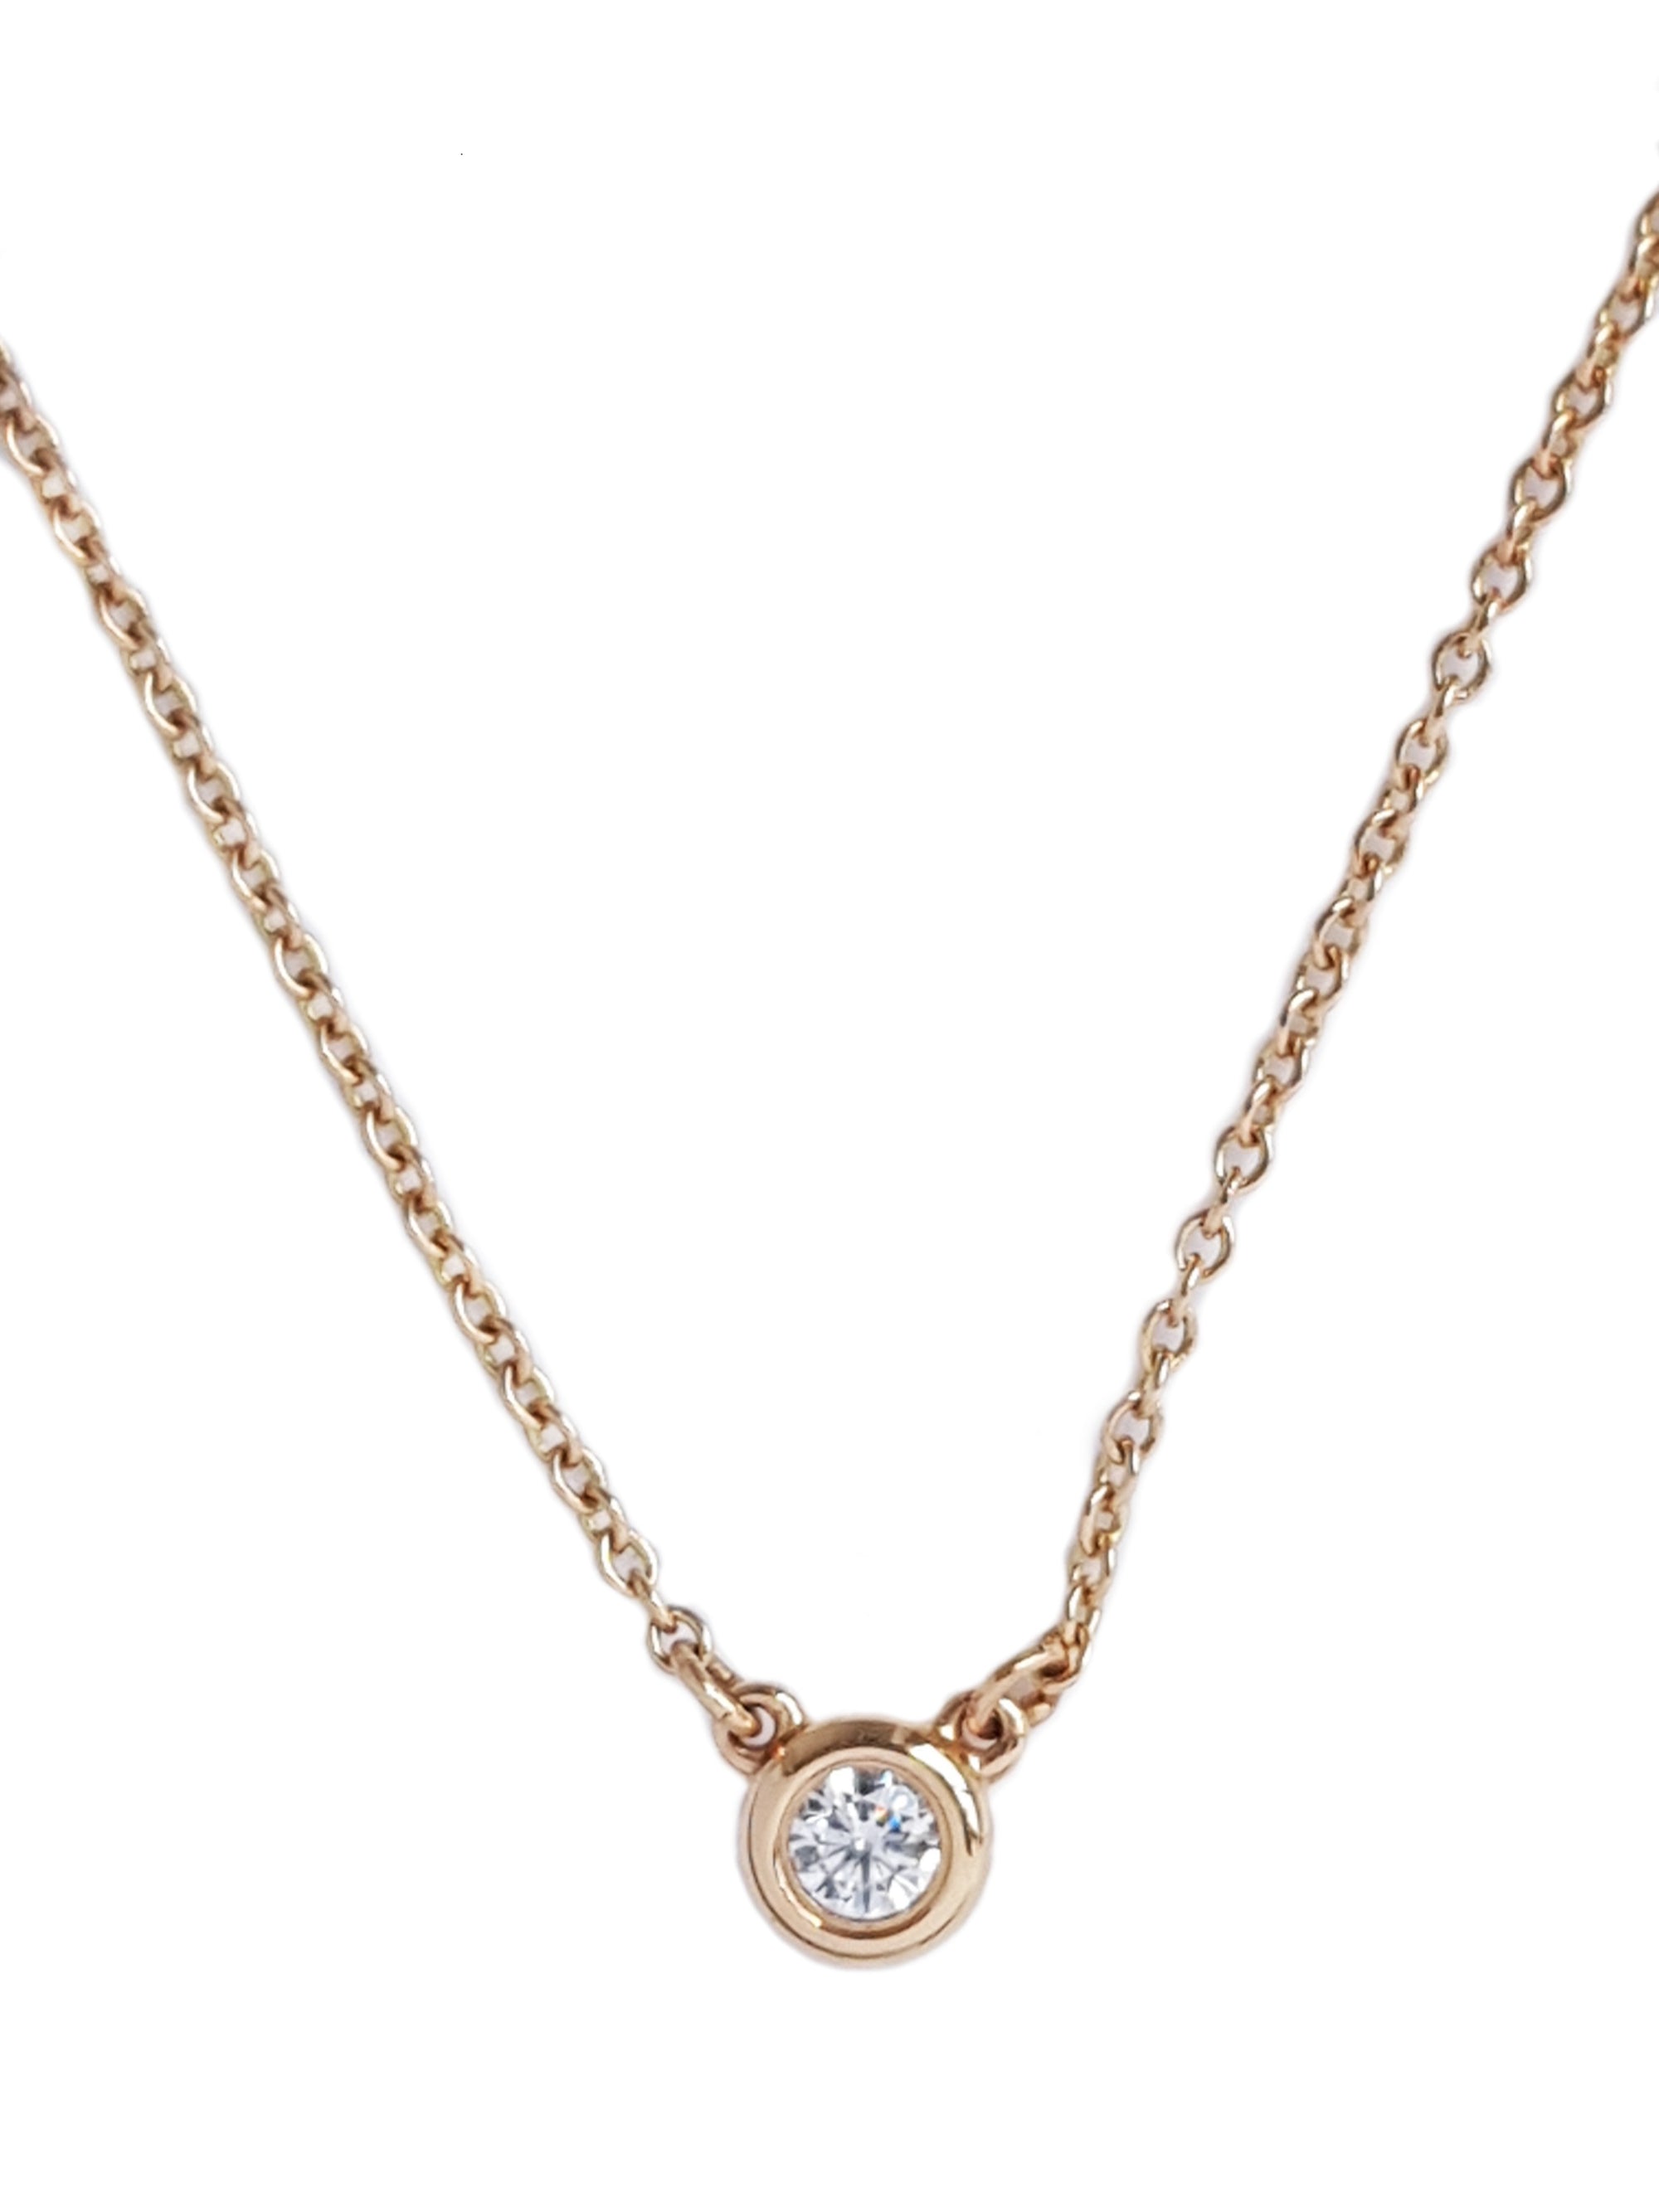 Tiffany & Co. 0.10ct Diamonds By the Yard 750 16" Necklace